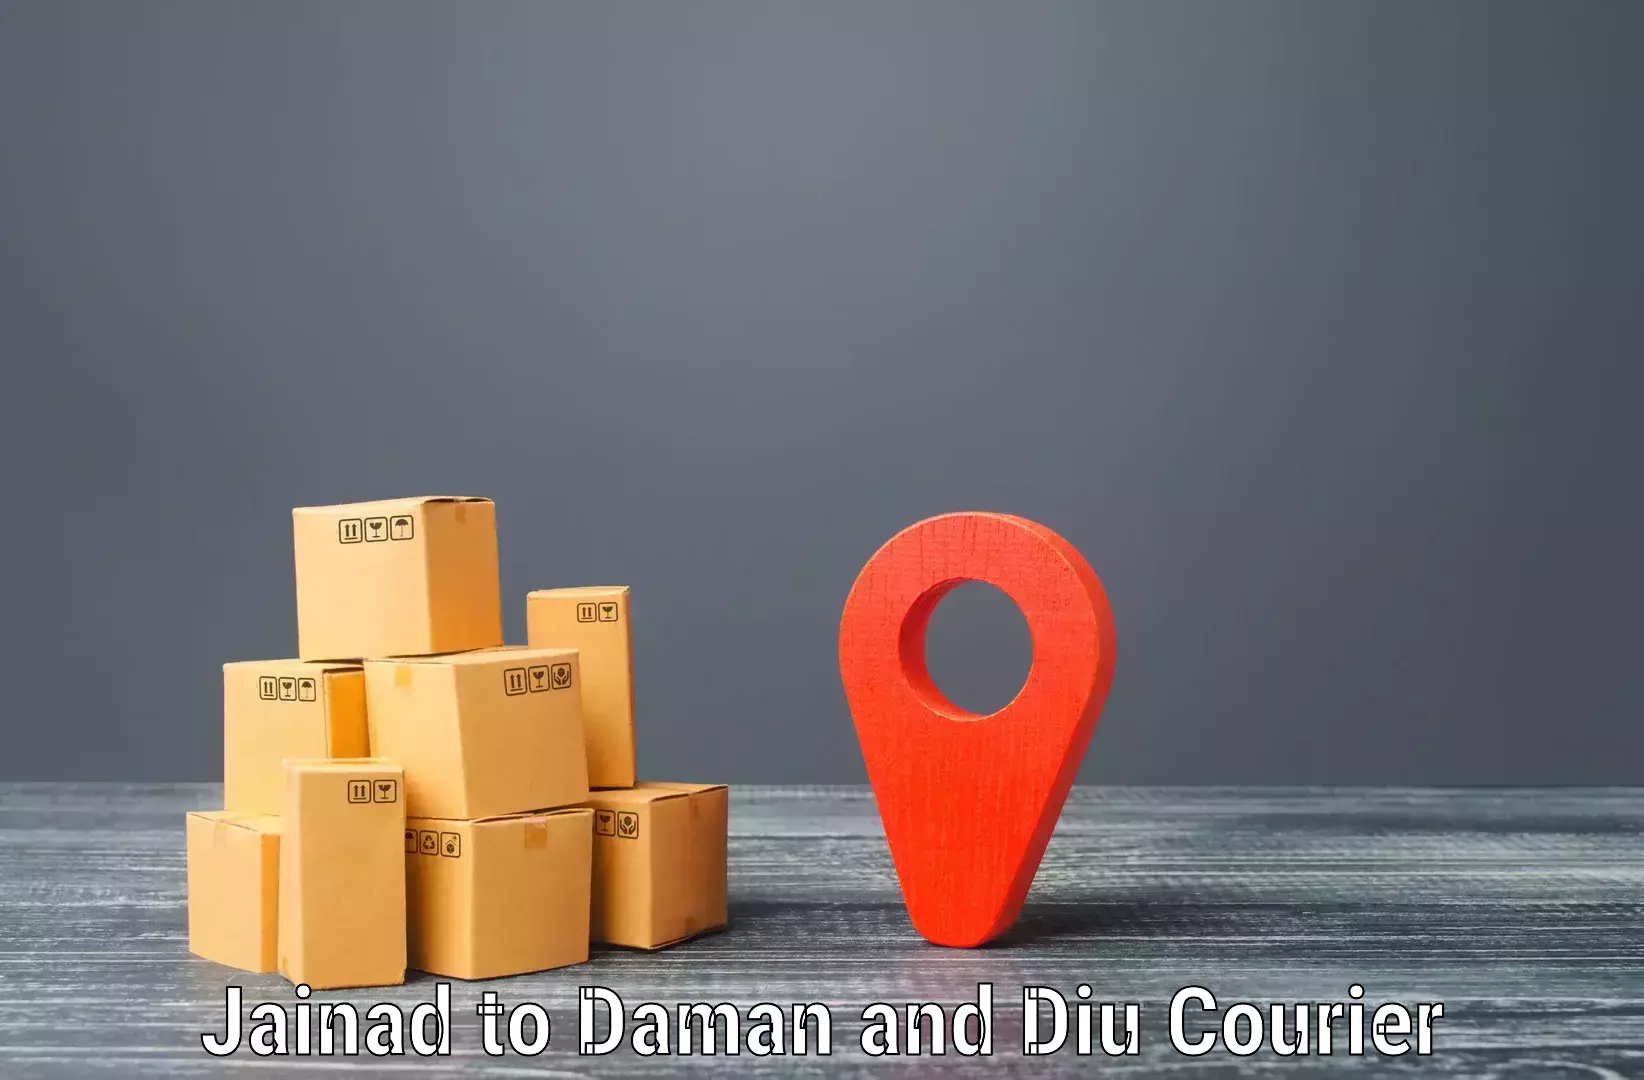 Secure package delivery in Jainad to Daman